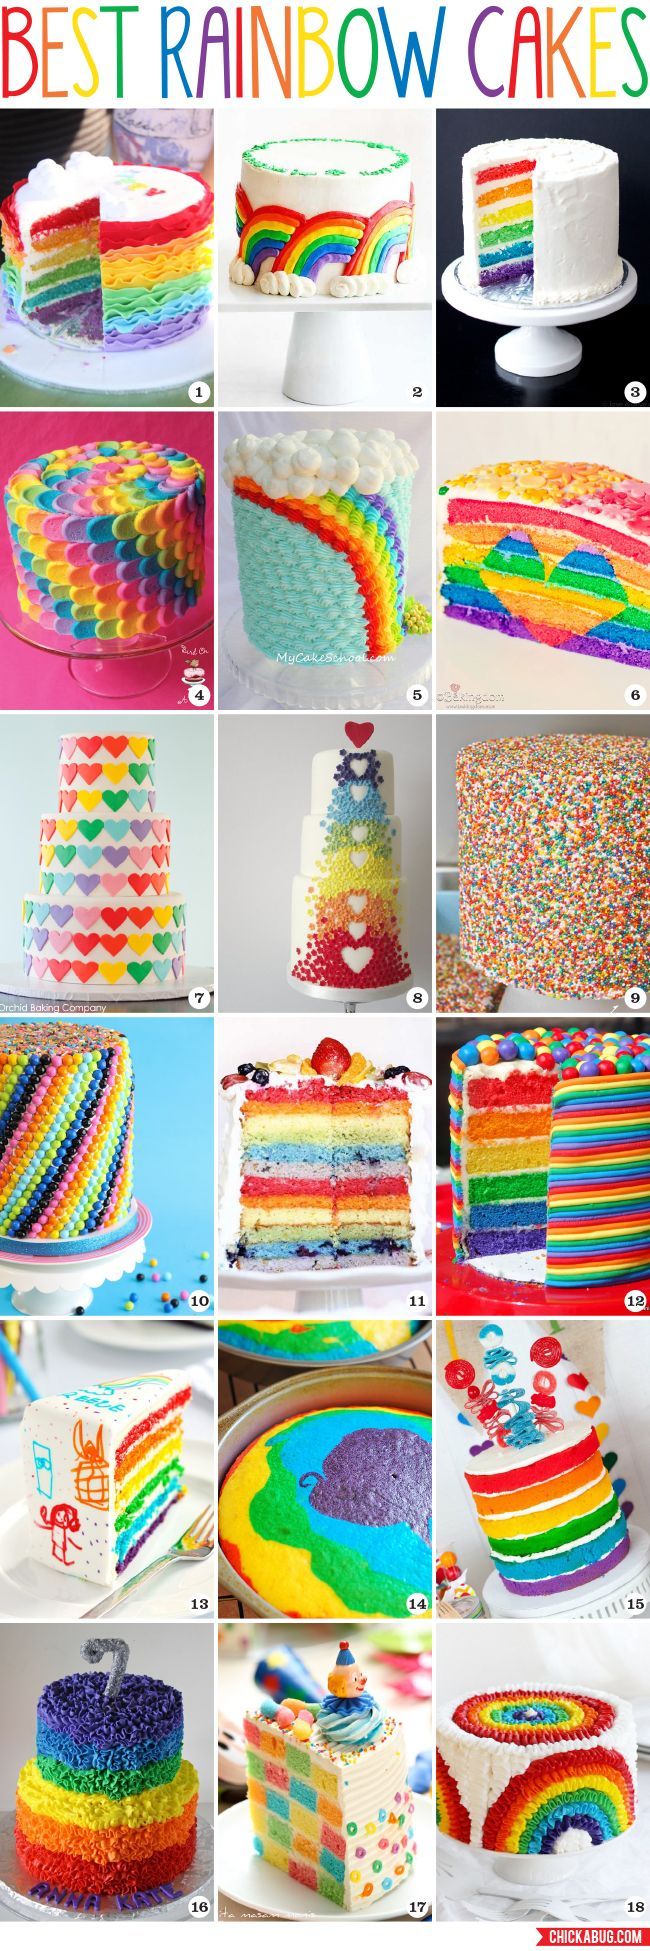 Everyone loves a rainbow cake! Here are a ton of rainbow cake recipes & decorating ideas.